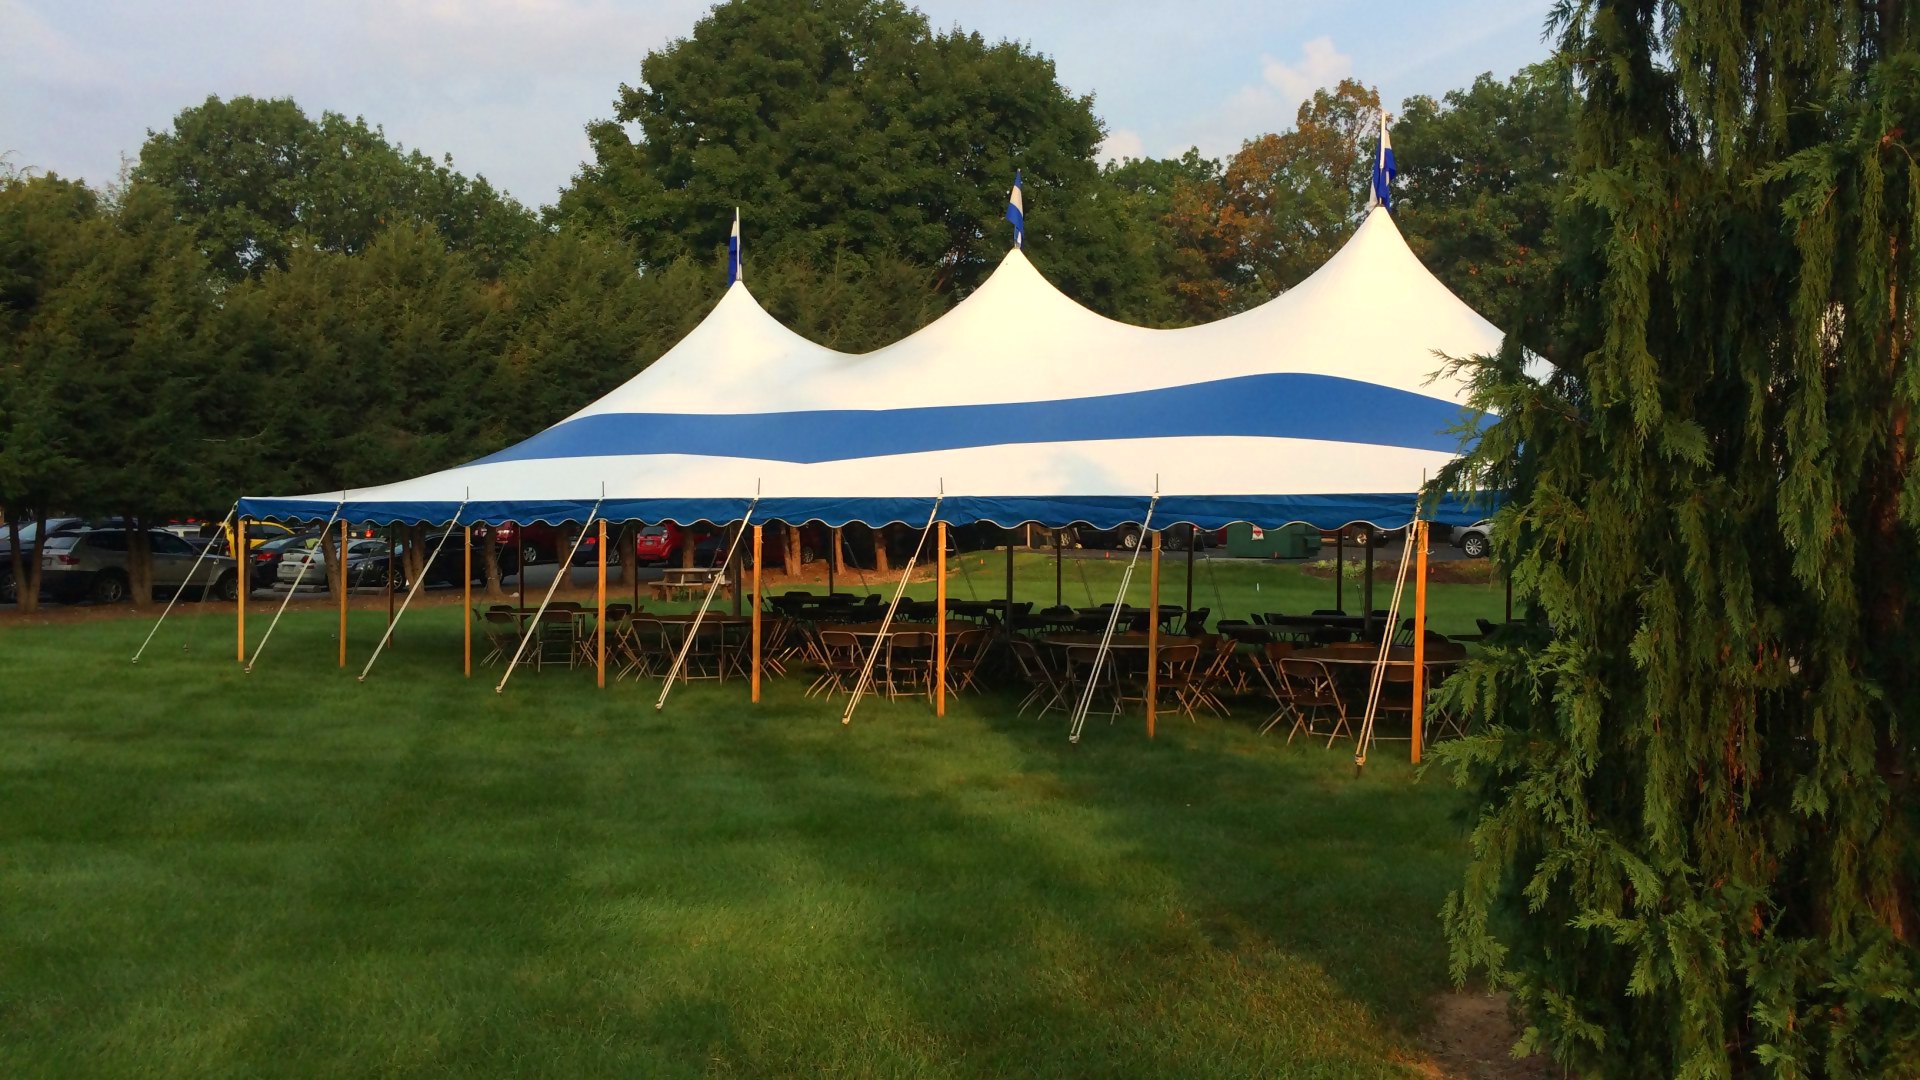 Large, blue party tent in State College, PA